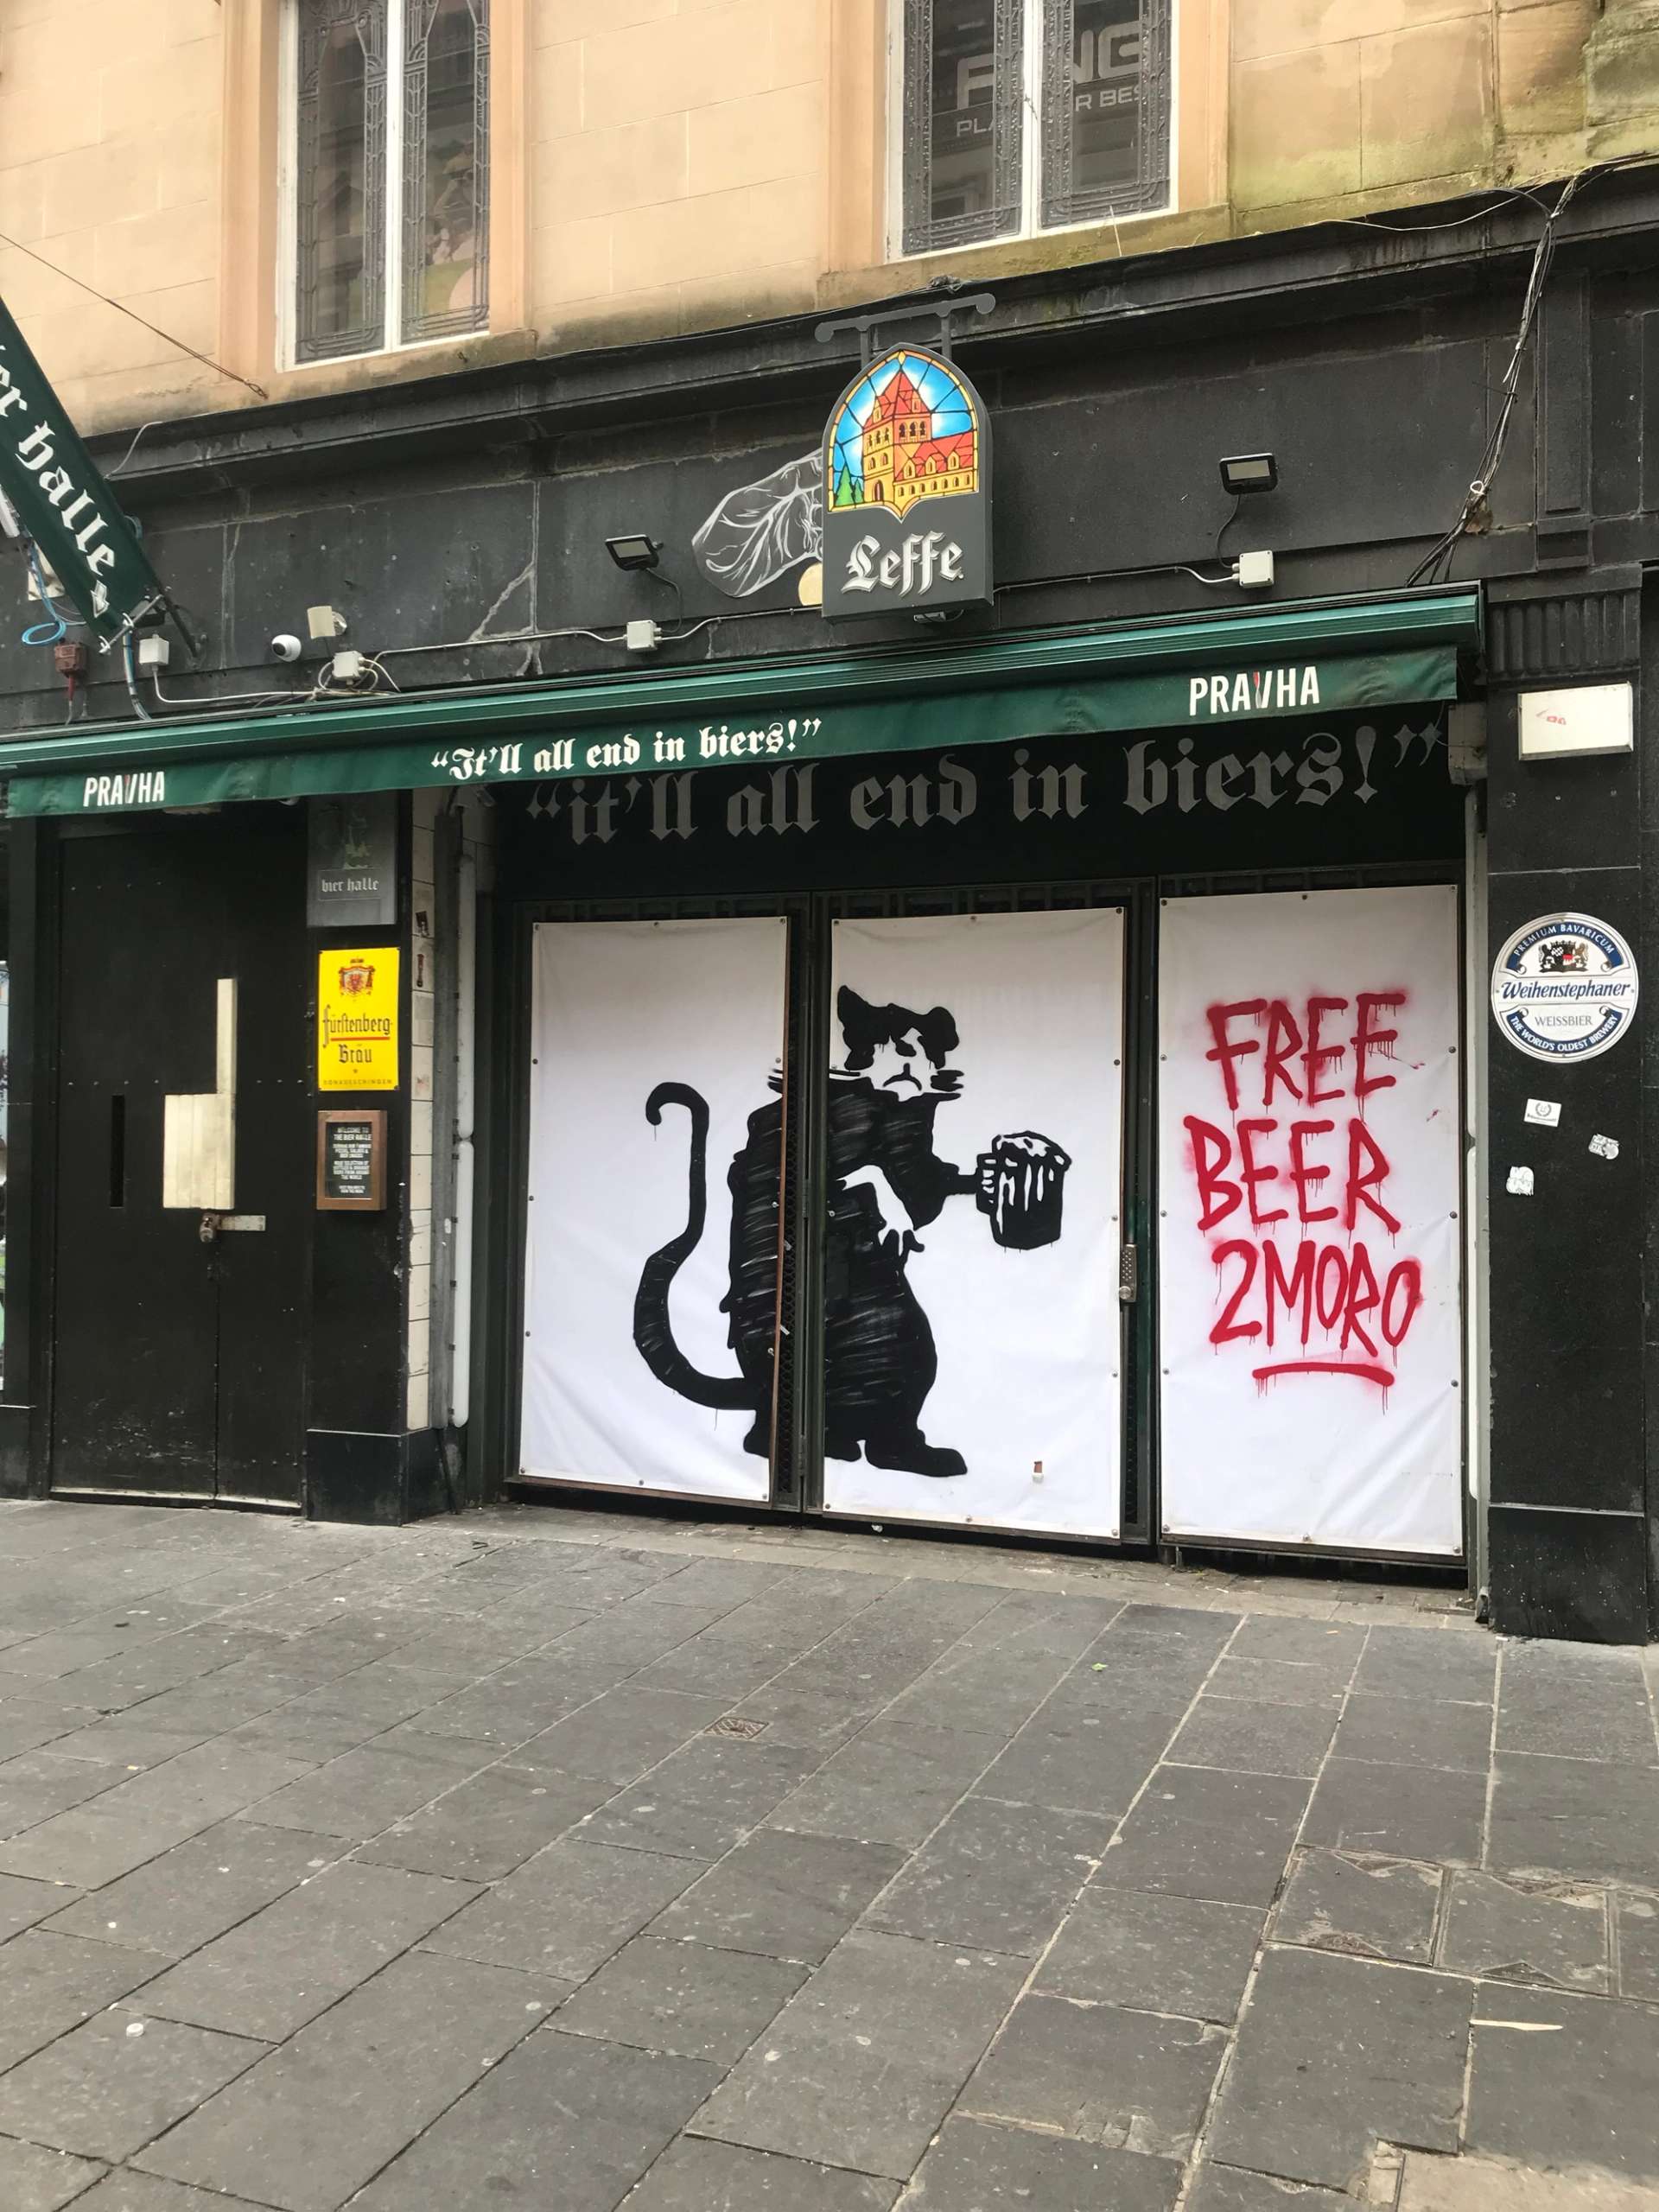 A graffiti artwork of a rat holding a pint of beer with the words: “FREE BEER 2MORO” sprayed in red next to it on the facade of a pub